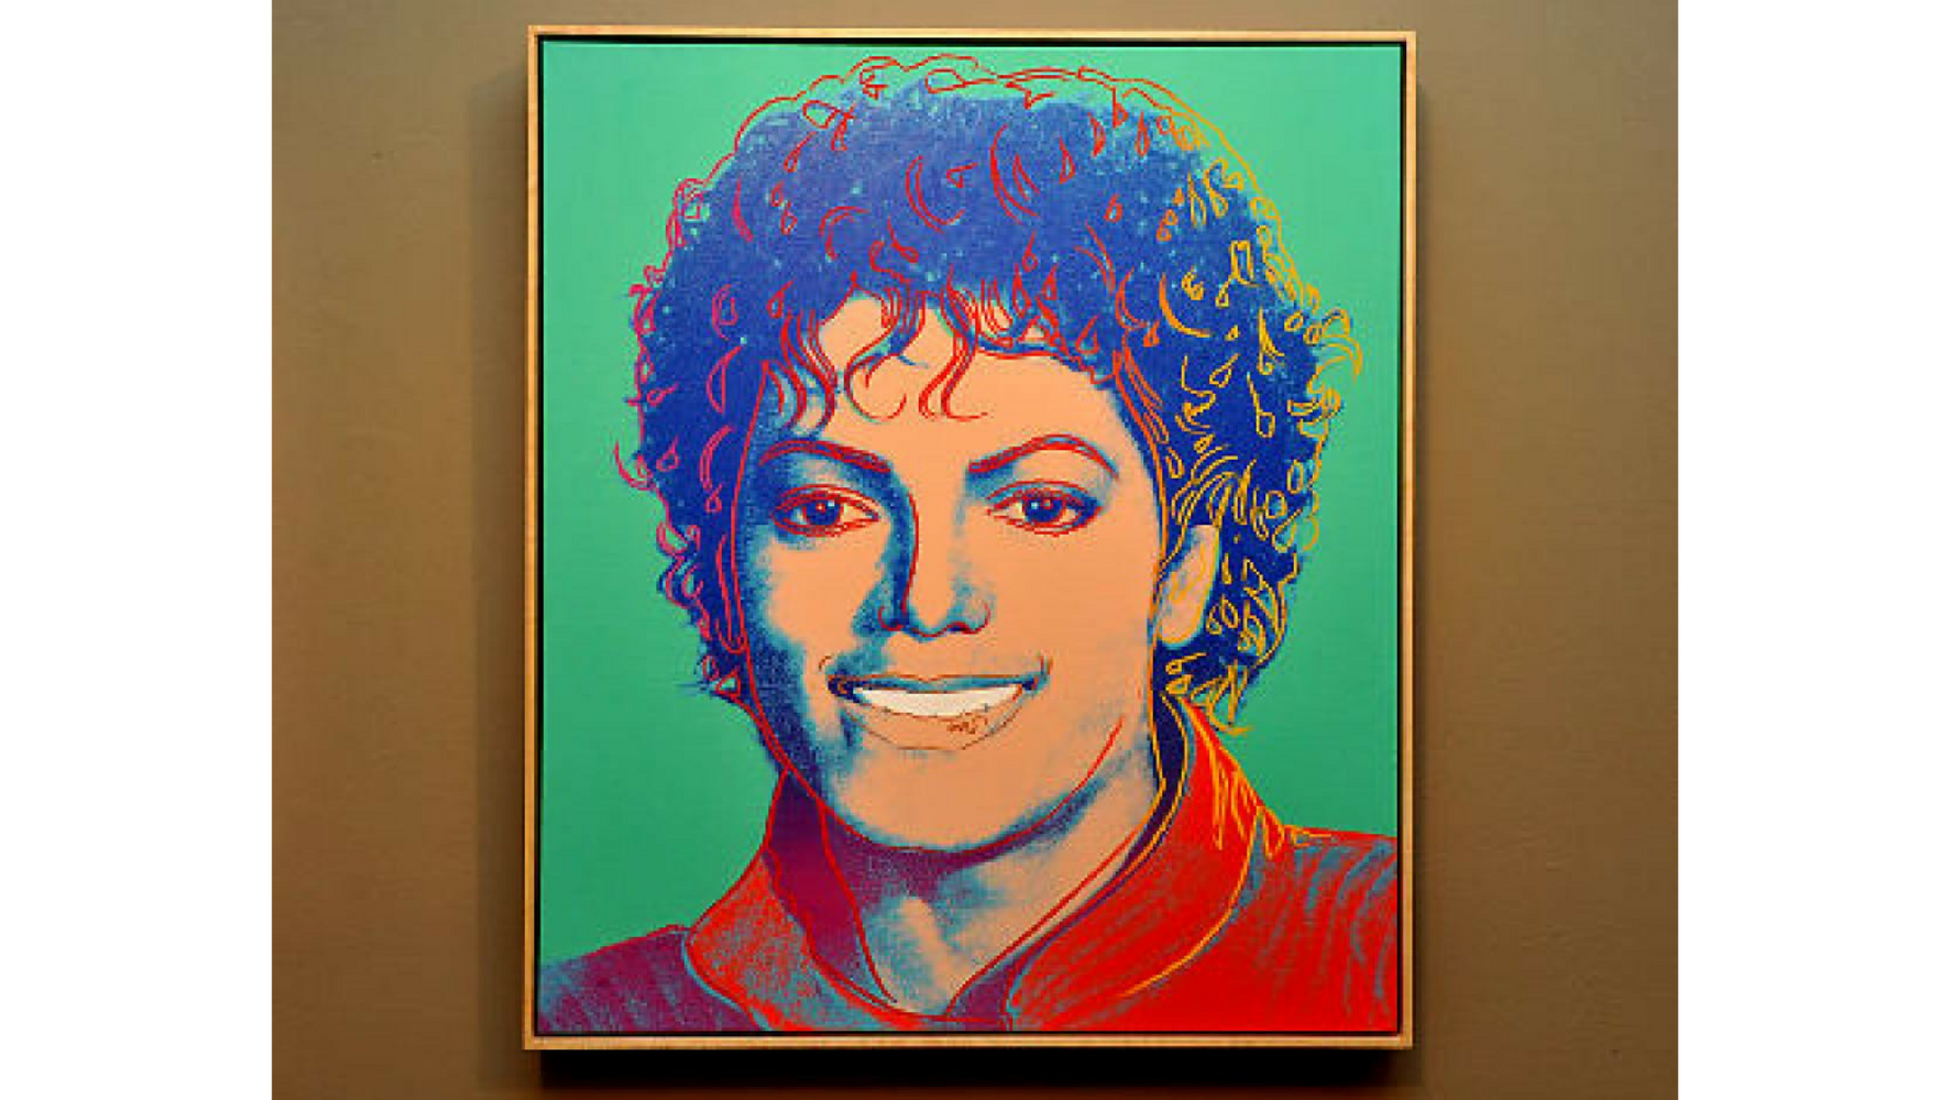 6 Of The Most Expensive Pieces Of Michael Jackson Memorabilia